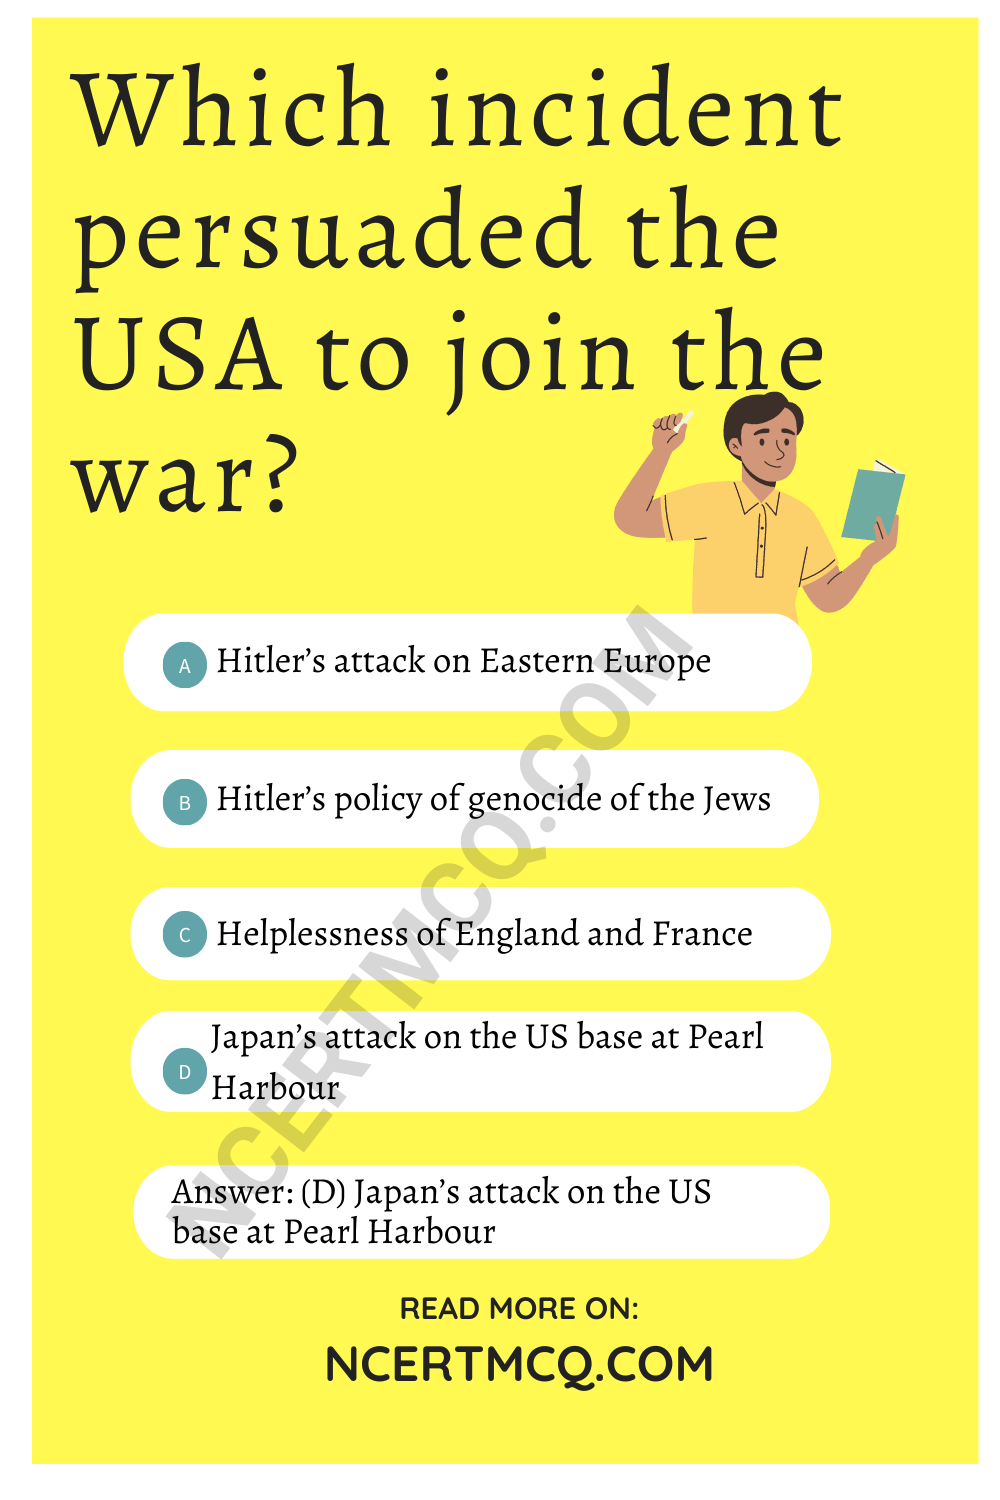 Which incident persuaded the USA to join the war?